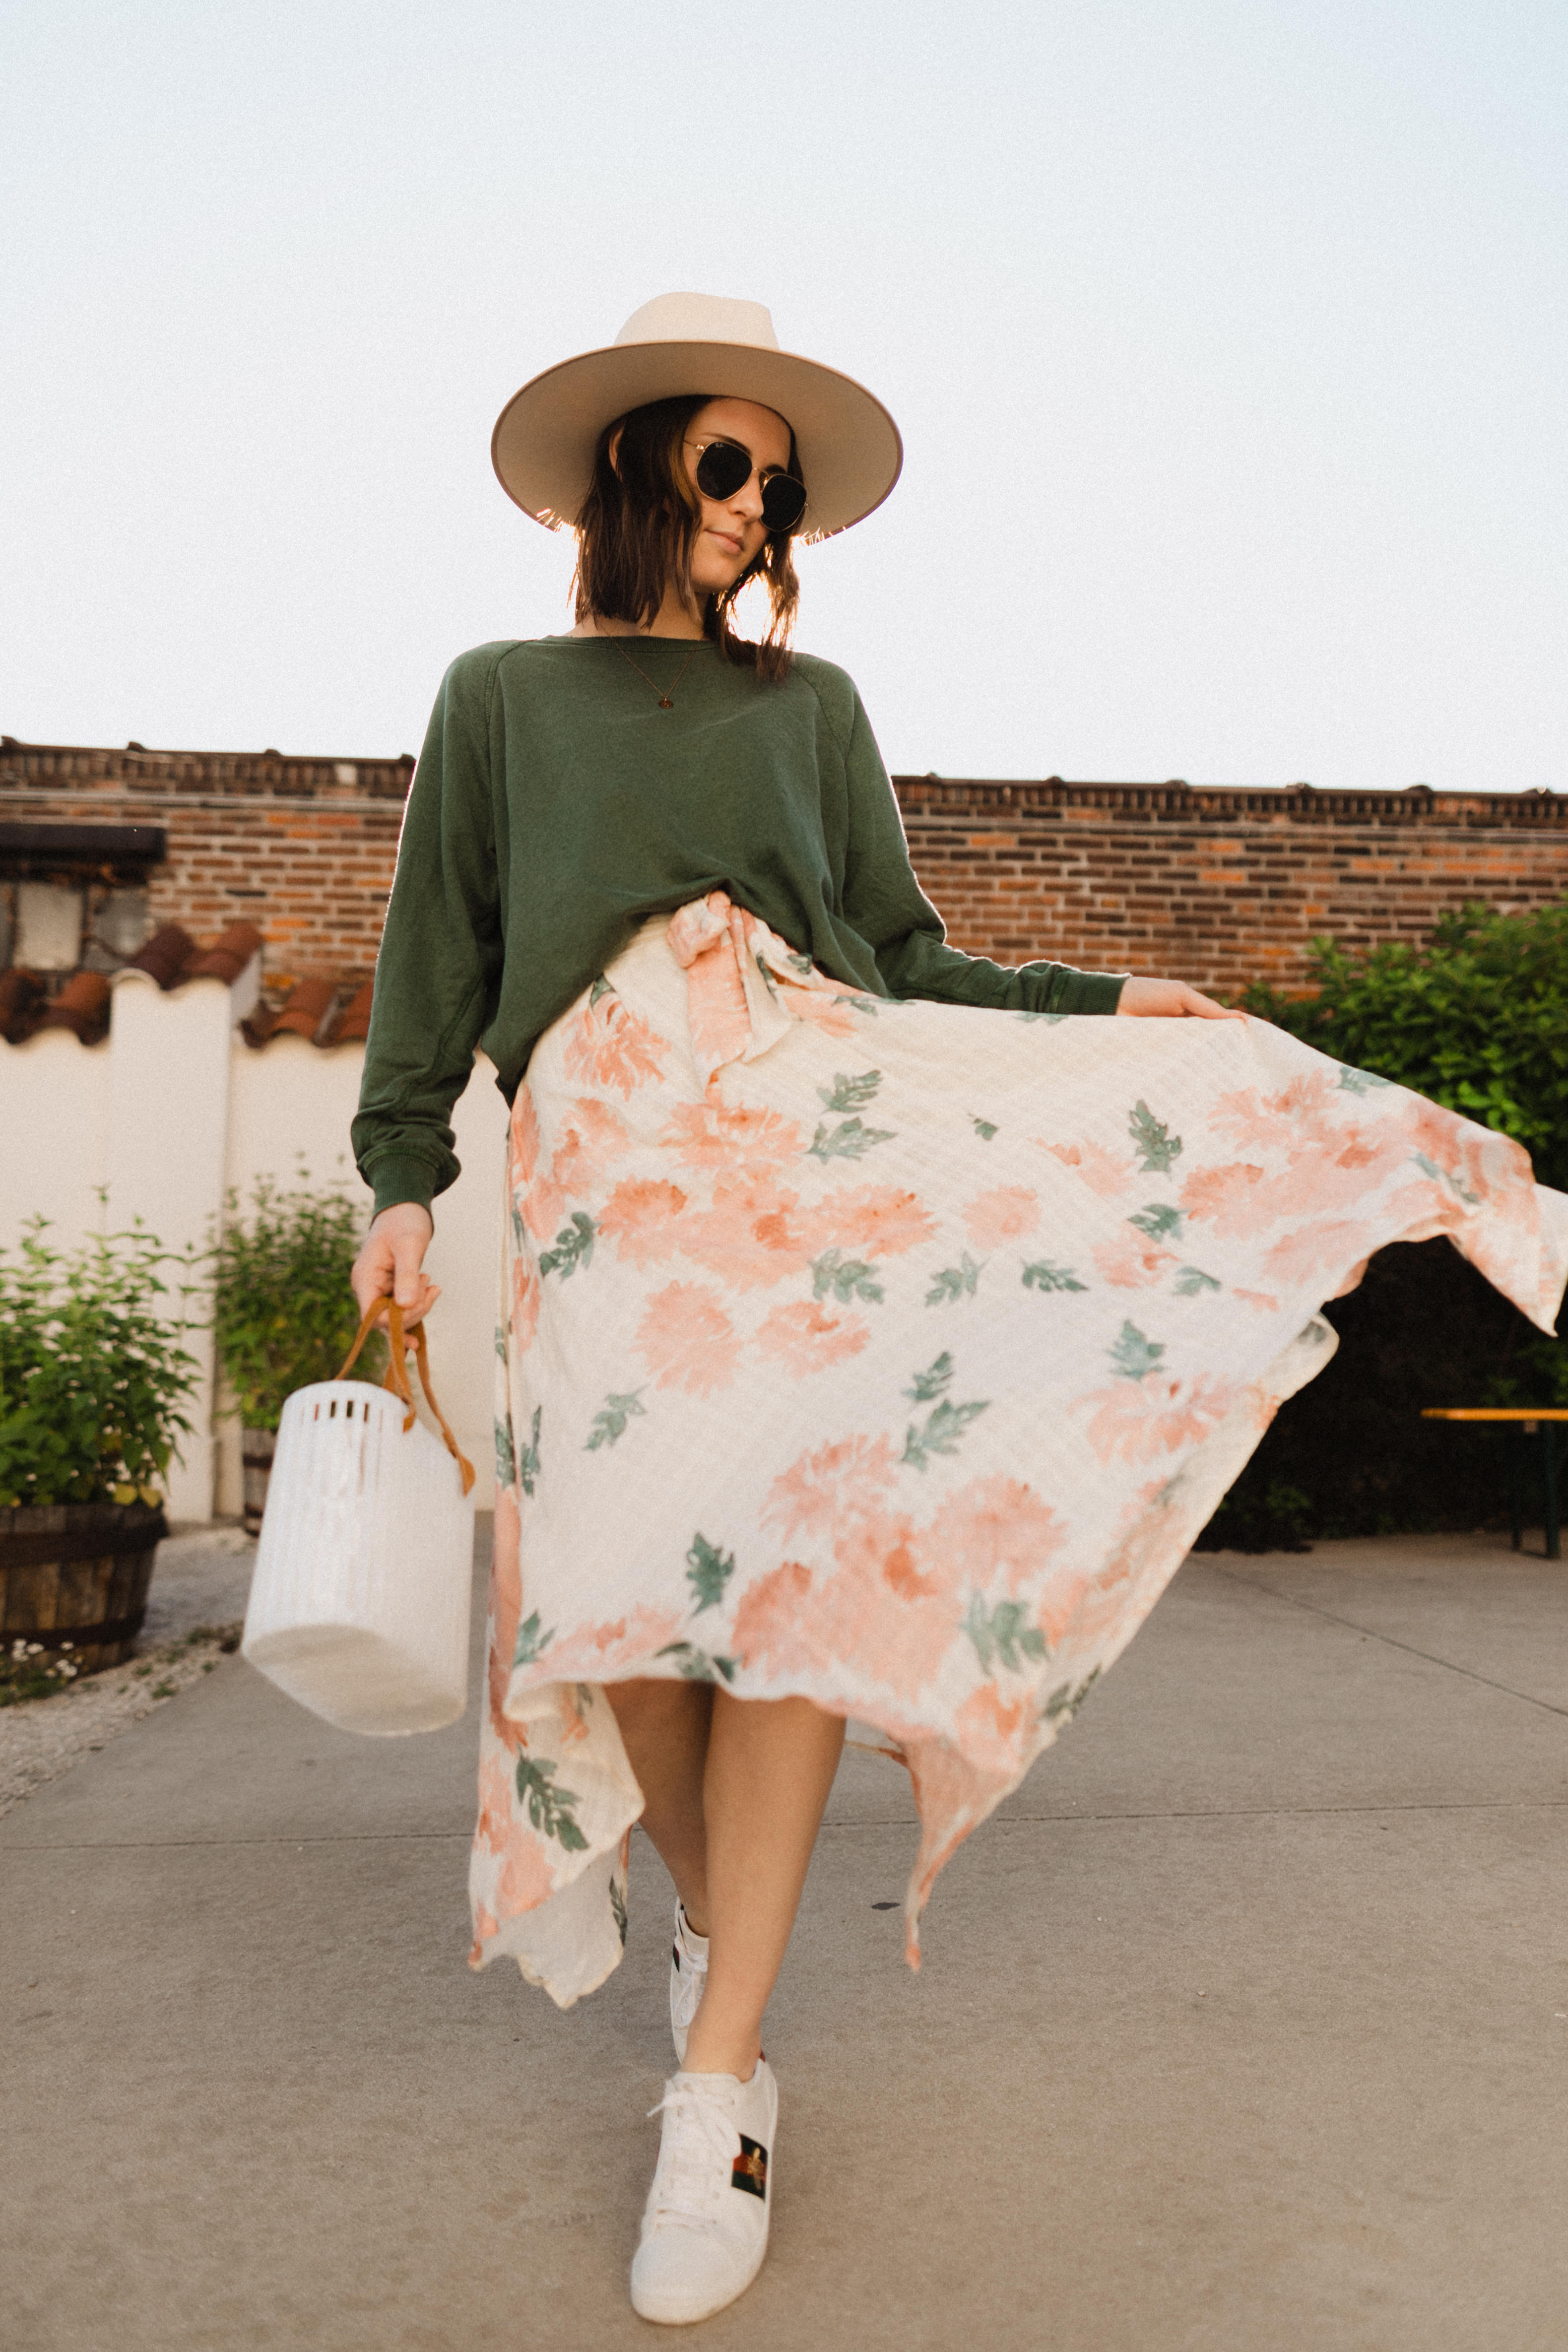 Lovestitch Clothing: 7 Outfits To Wear This Summer | sweatshirt outfit summer | sweatshirt outfit casual | maxi skirt outfit summer | maxi skirt outfit casual | skirt and sneakers outfit | midi skirt outfit casual | Oh Darling Blog